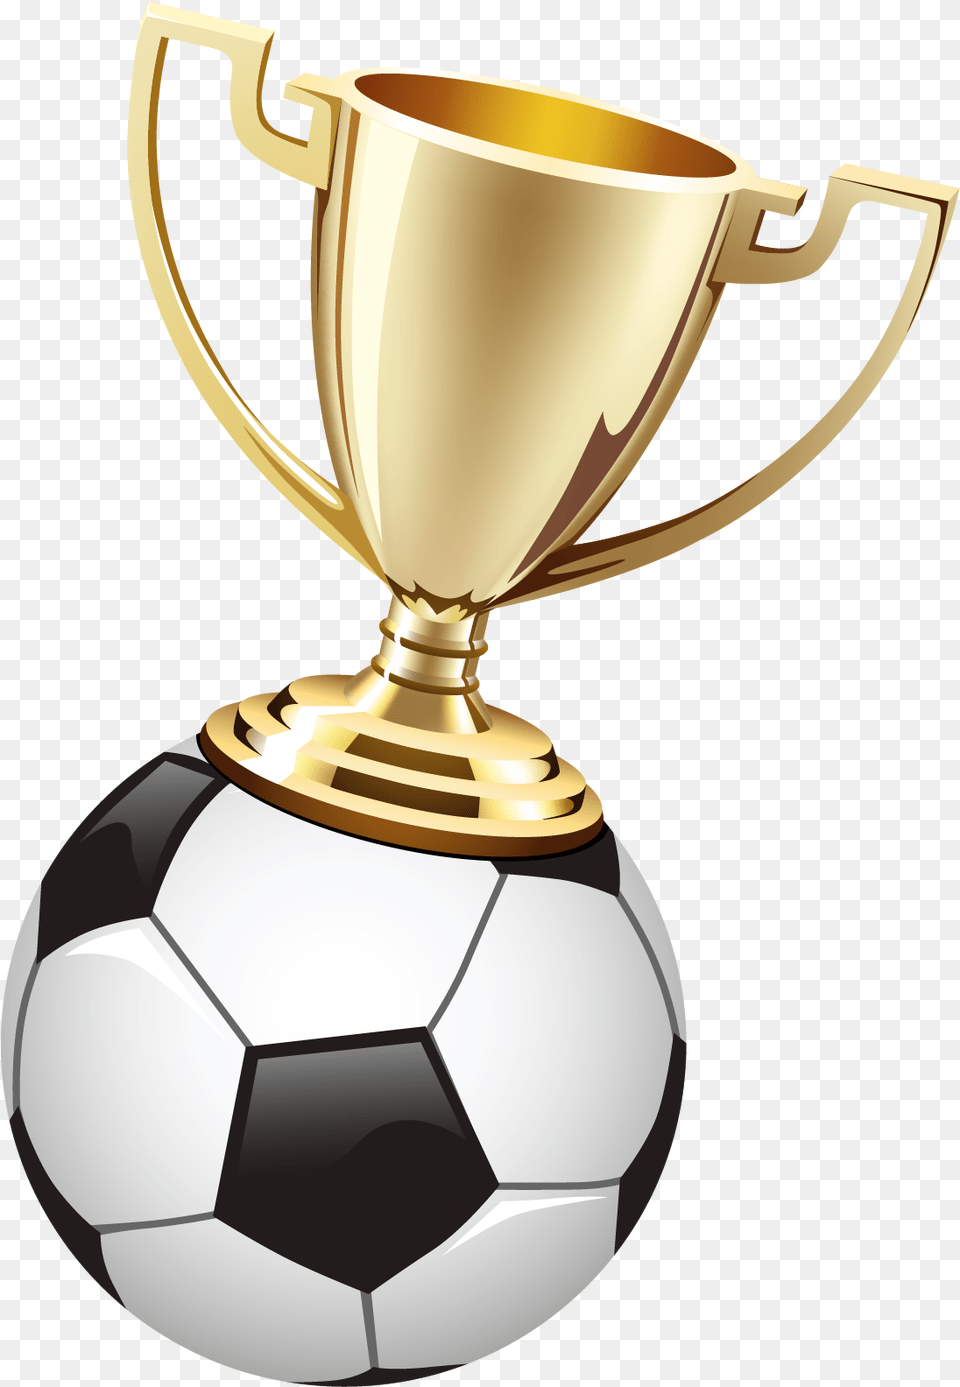 Football Trophies Clipart Clip Art Library Library Copa De Futbol, Trophy, Smoke Pipe Png Image